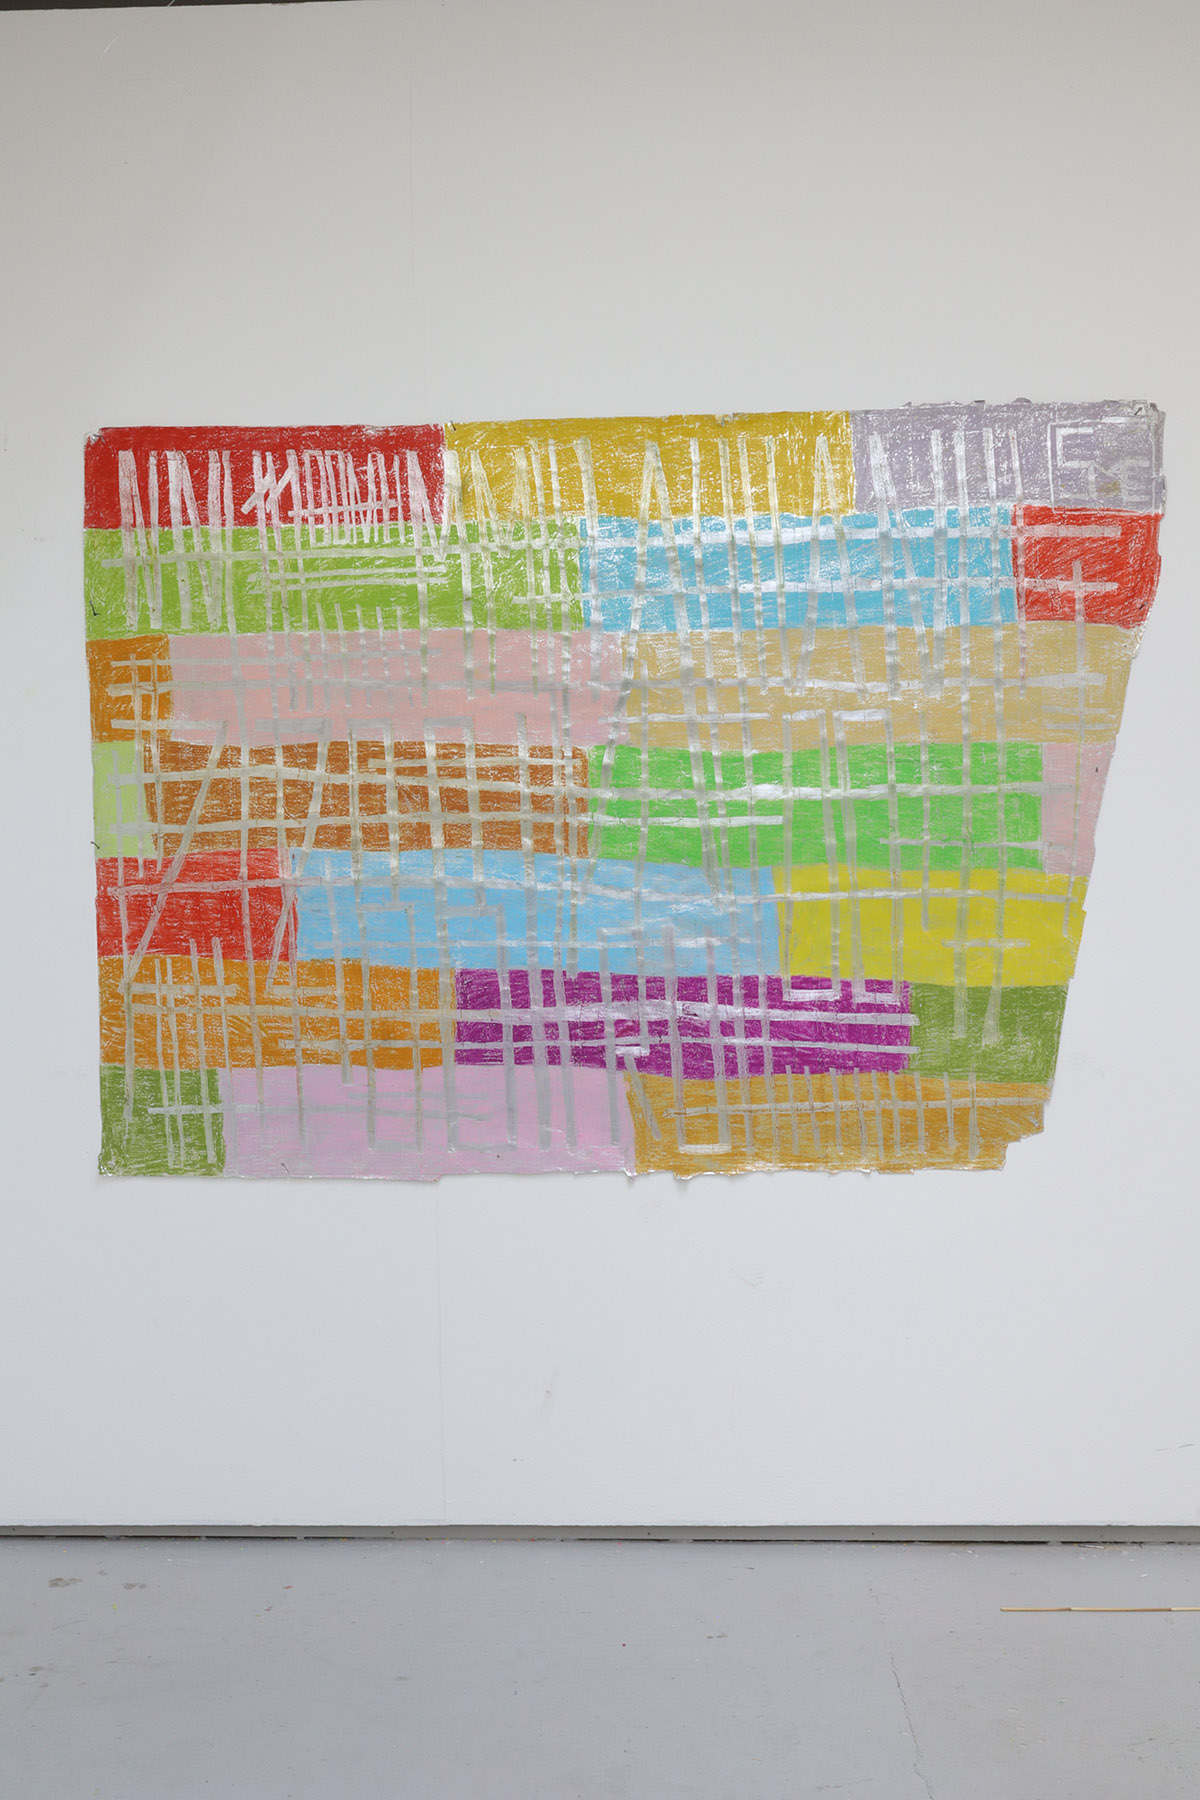 A colourful oil pastel drawing of rectangular blocks of colour, with a silver tape running through it, hanging on a white wall.